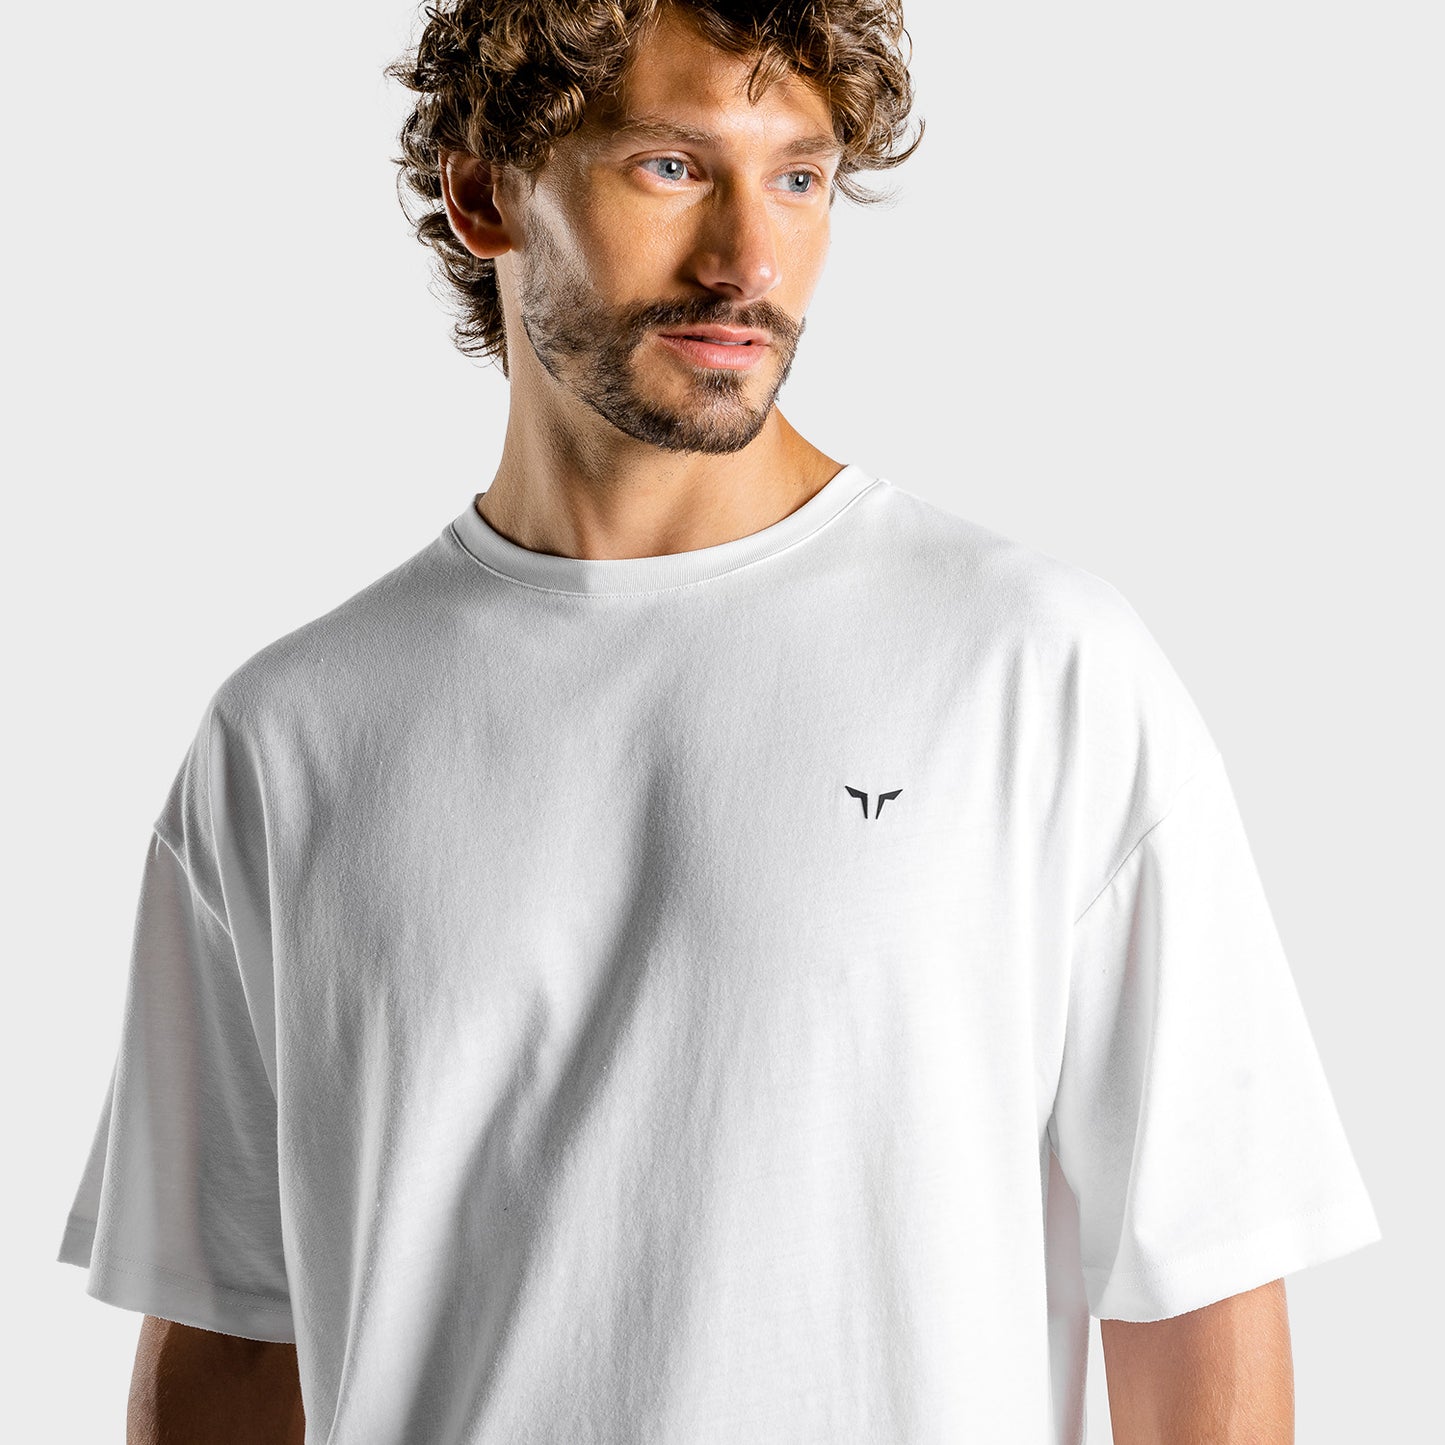 squatwolf-workout-shirts-for-men-luxe-oversize-tee-white-gym-wear